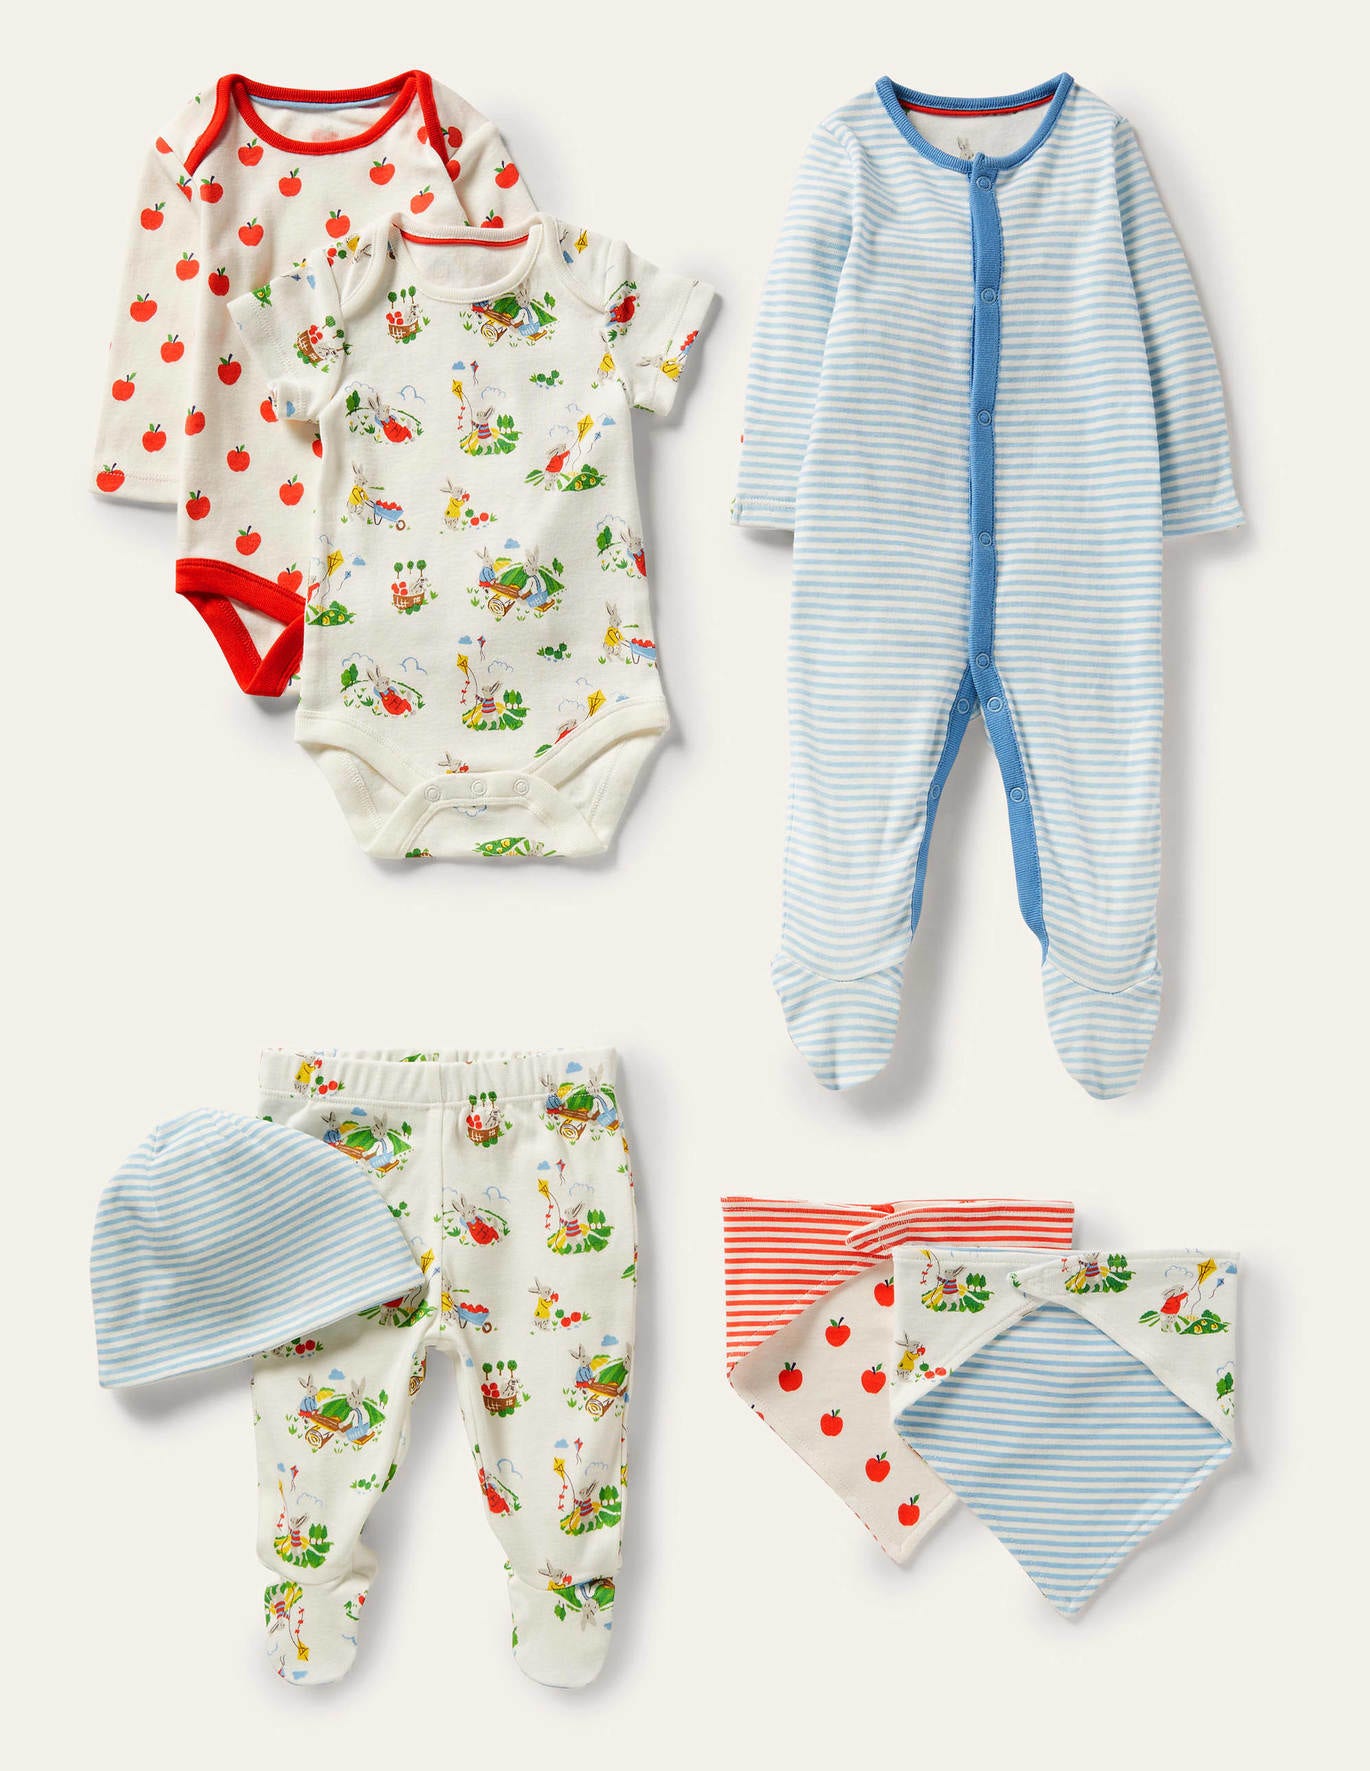 Boden GOTS Organic 7 Piece Gift Set - Ivory Daydreaming Bunny